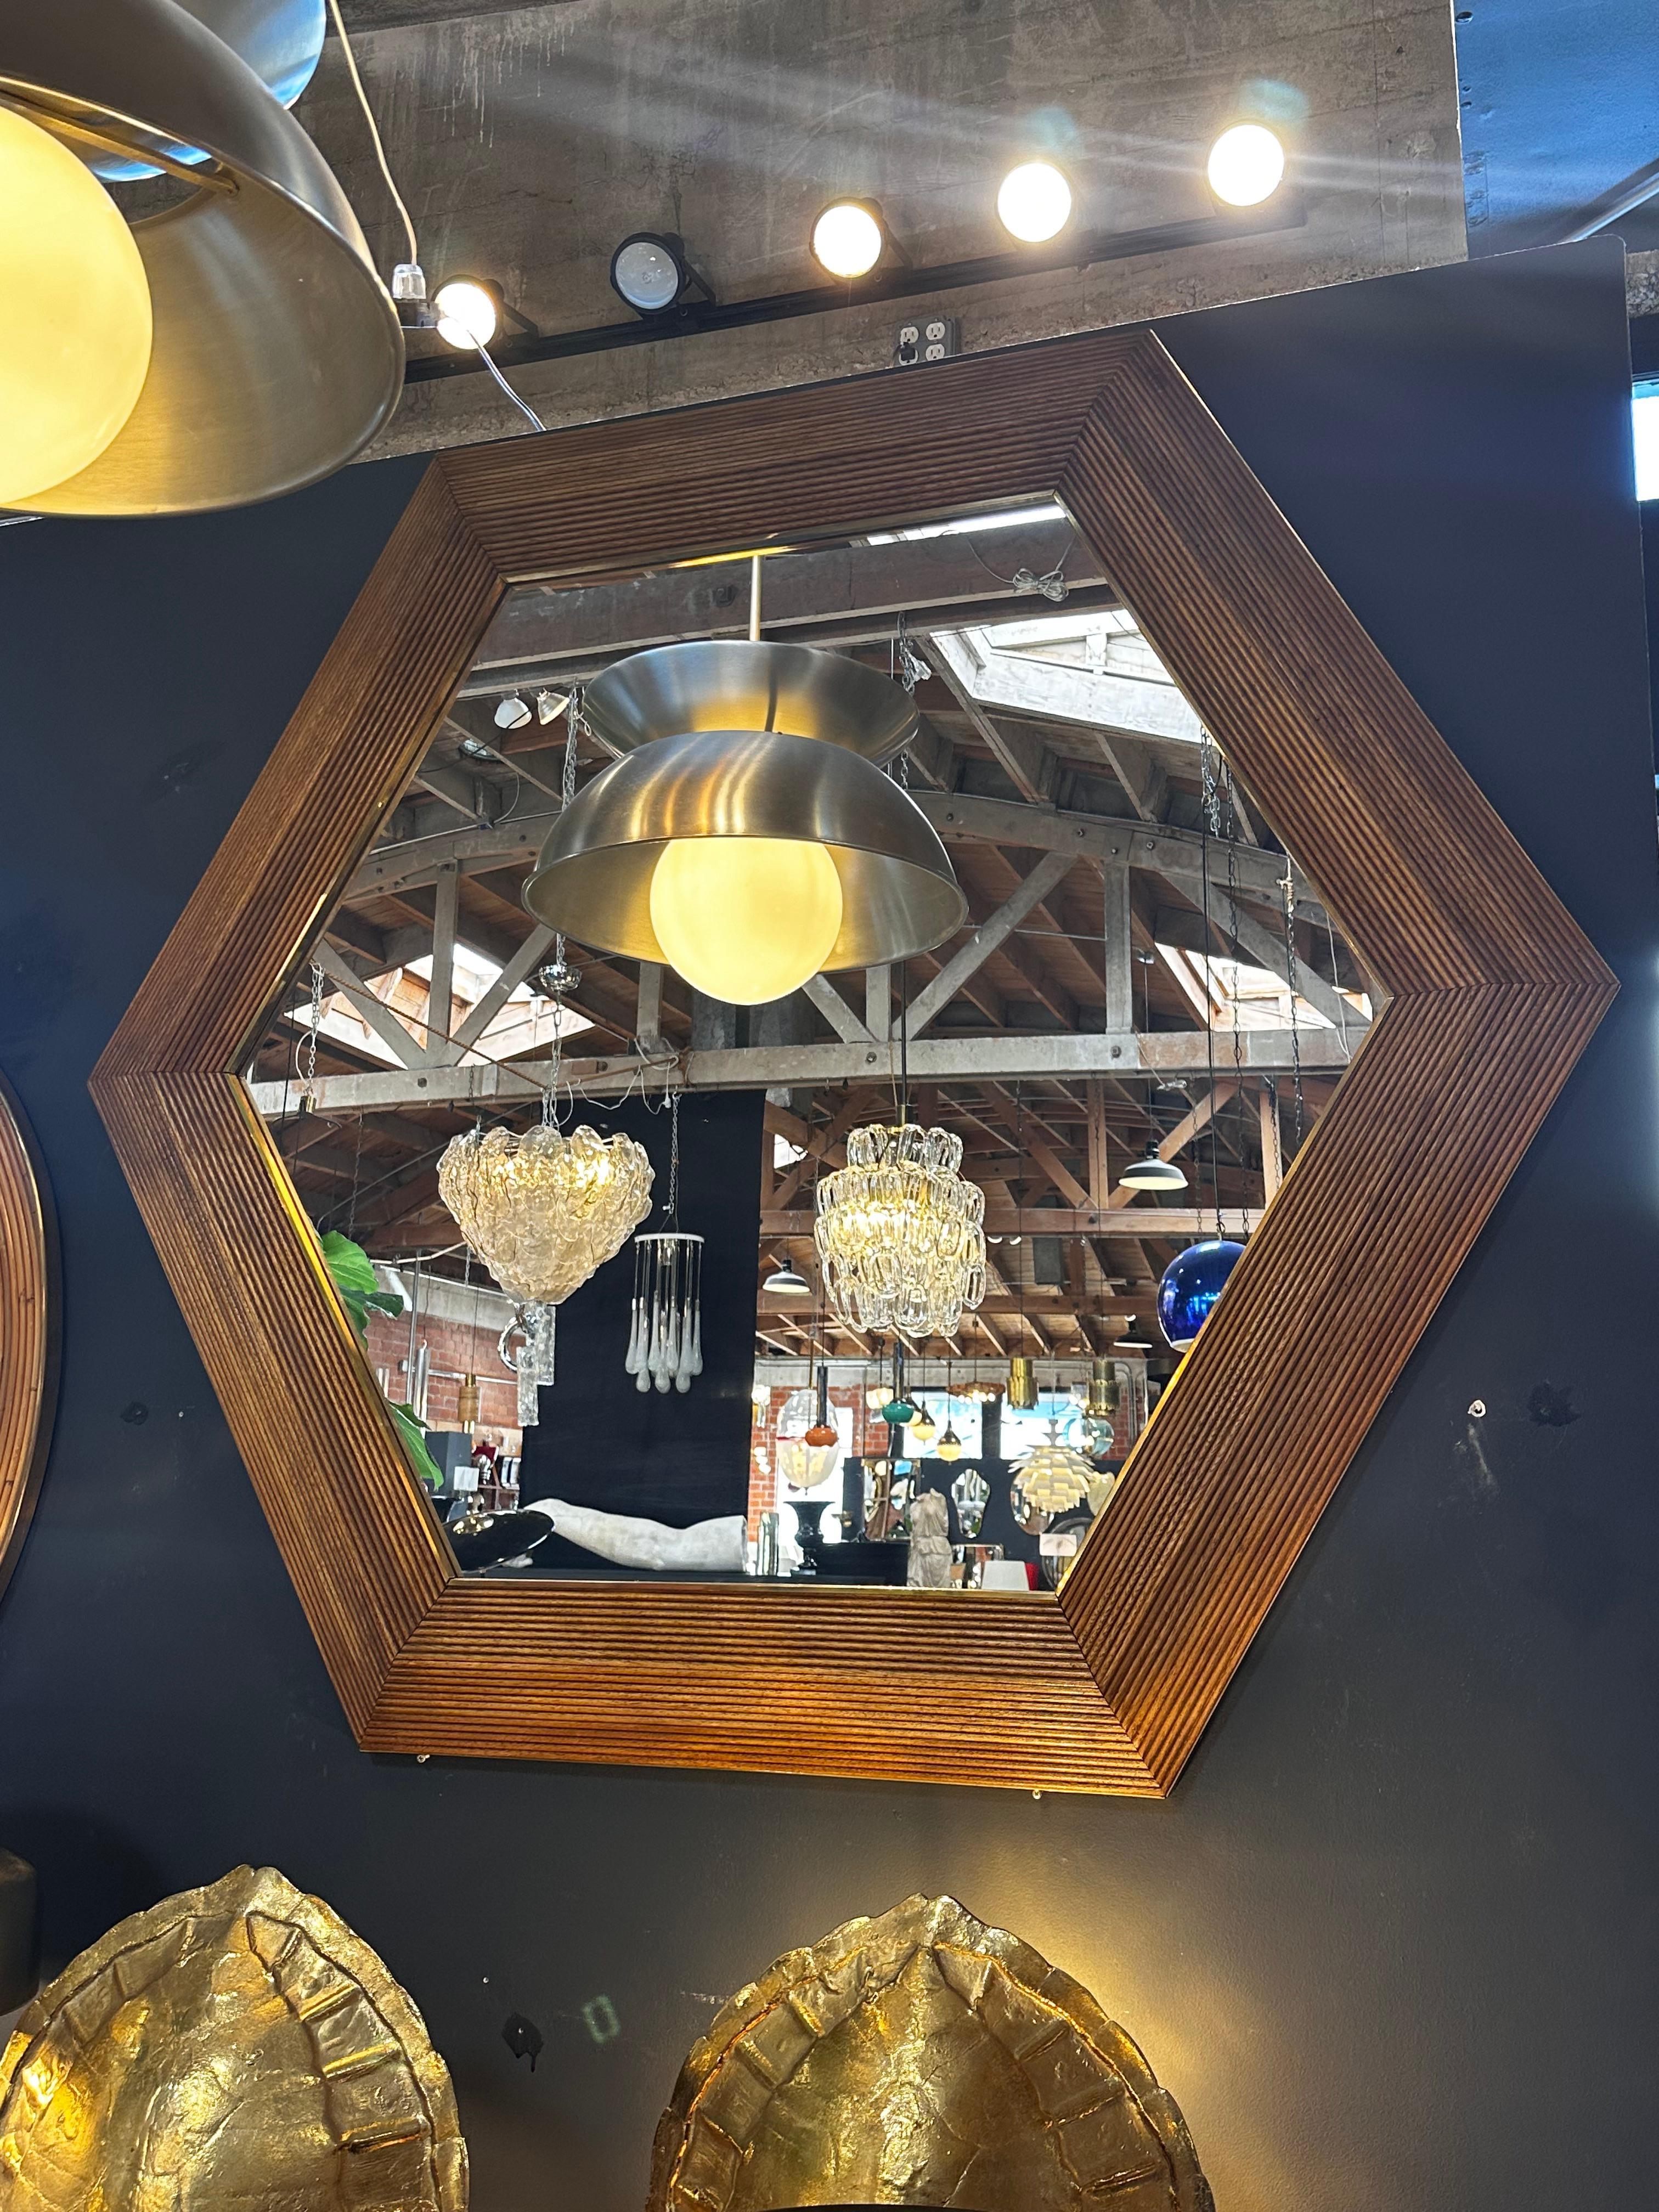 The Oversize Vintage Hexagonal Wall Mirror from the 1980s is a statement piece characterized by its large hexagonal shape. This mirror, reflecting the design trends of the 1980s, features bold proportions and often incorporates a mix of materials in